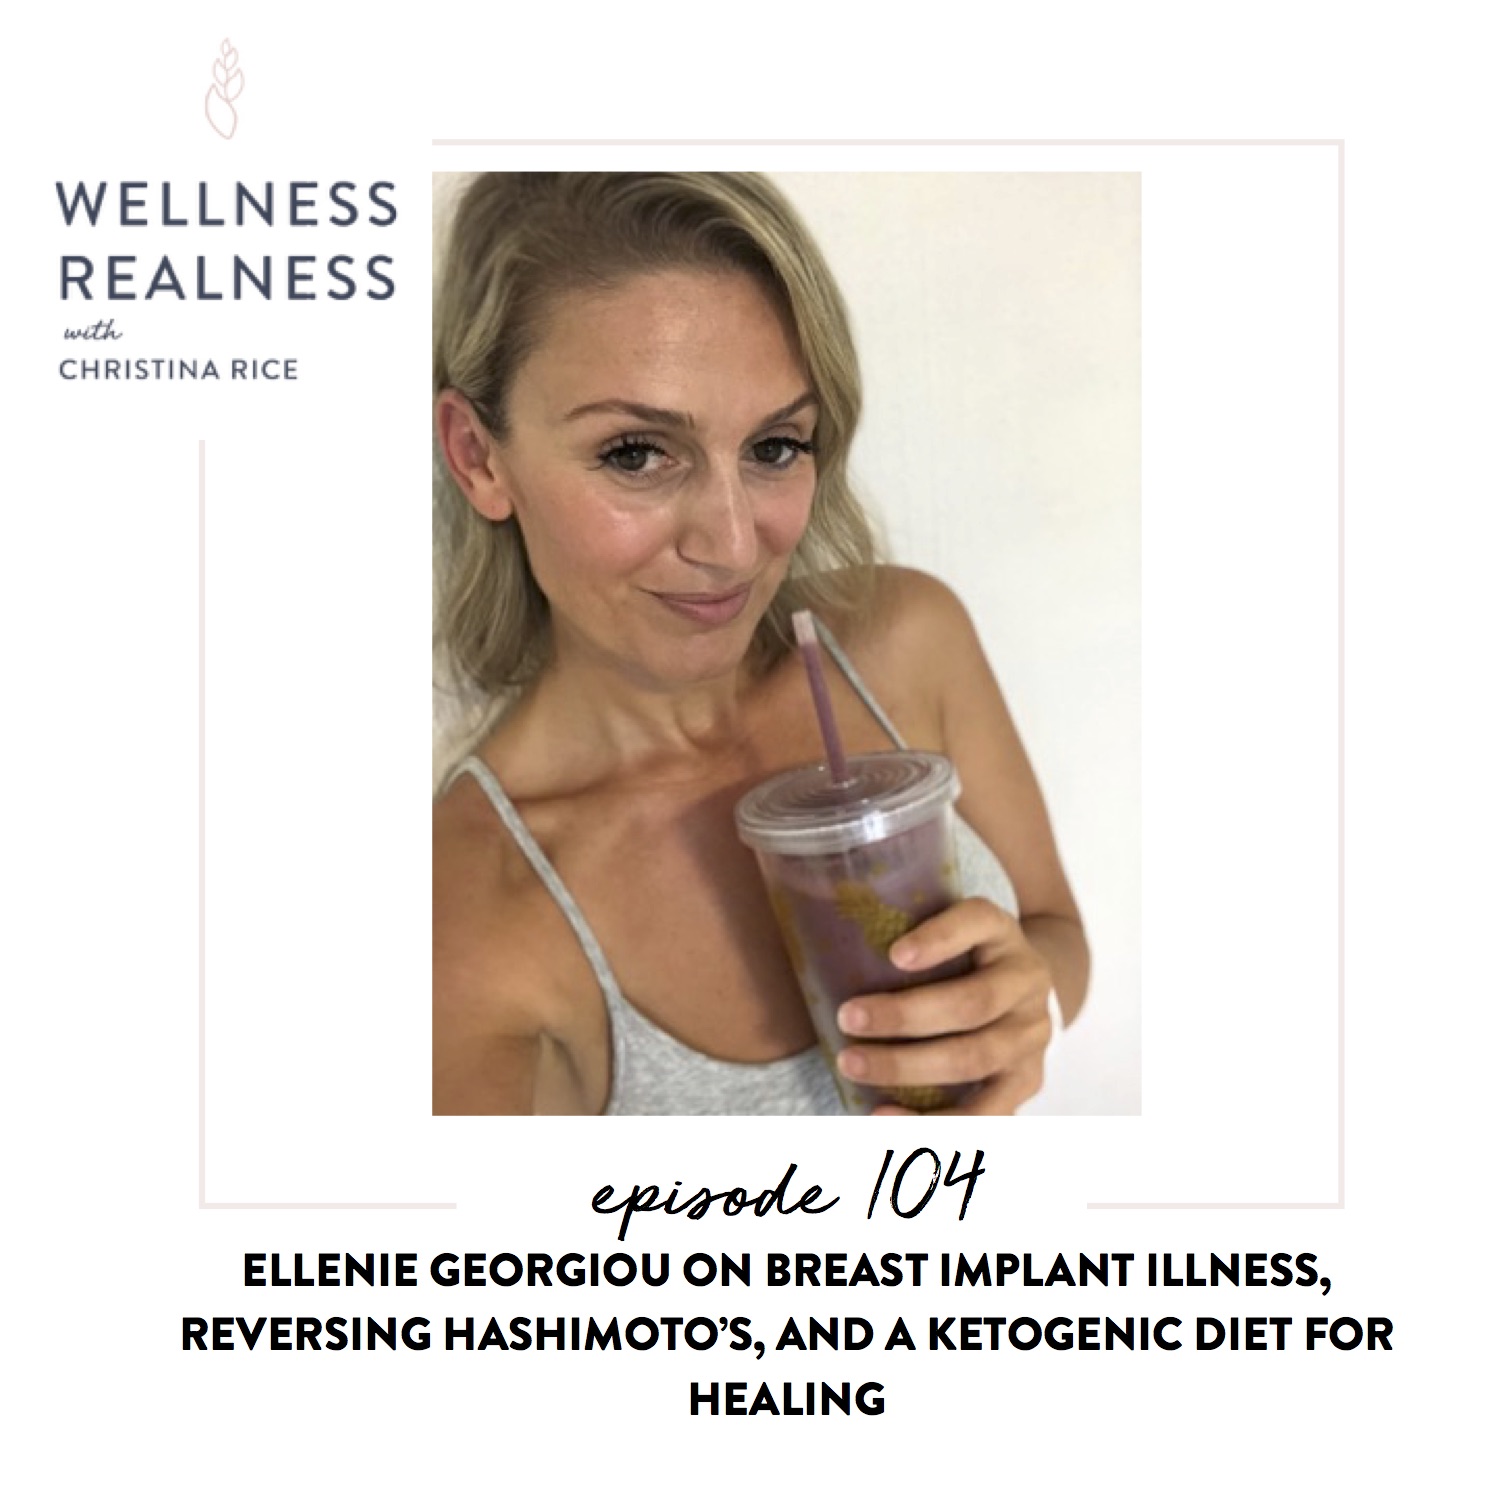 104: Ellenie Georgiou on Breast Implant Illness, Reversing Hashimoto's, and a Ketogenic Diet for Healing